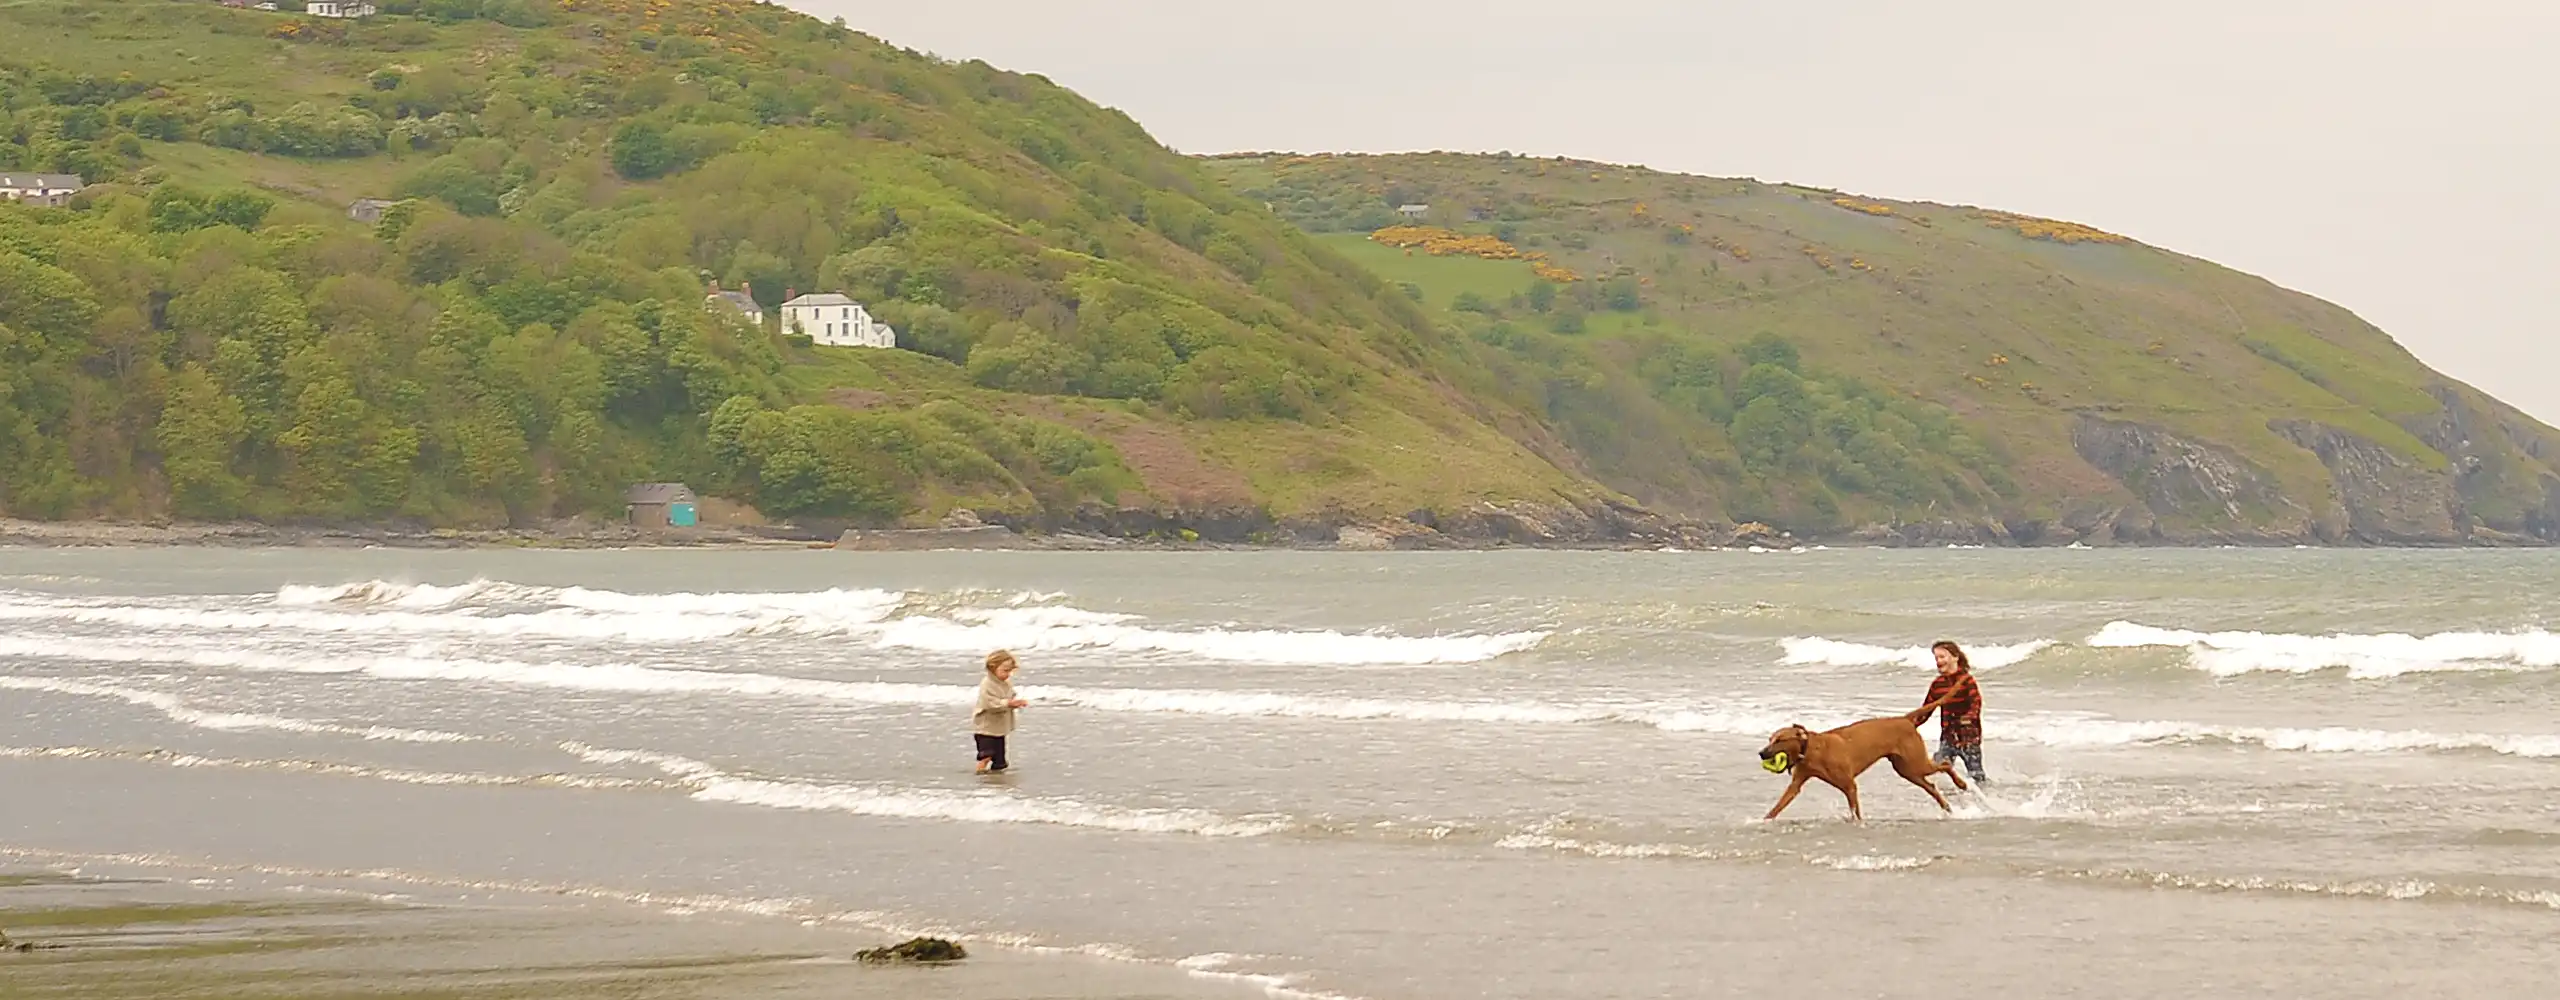 Take a paddle at Poppit Sands